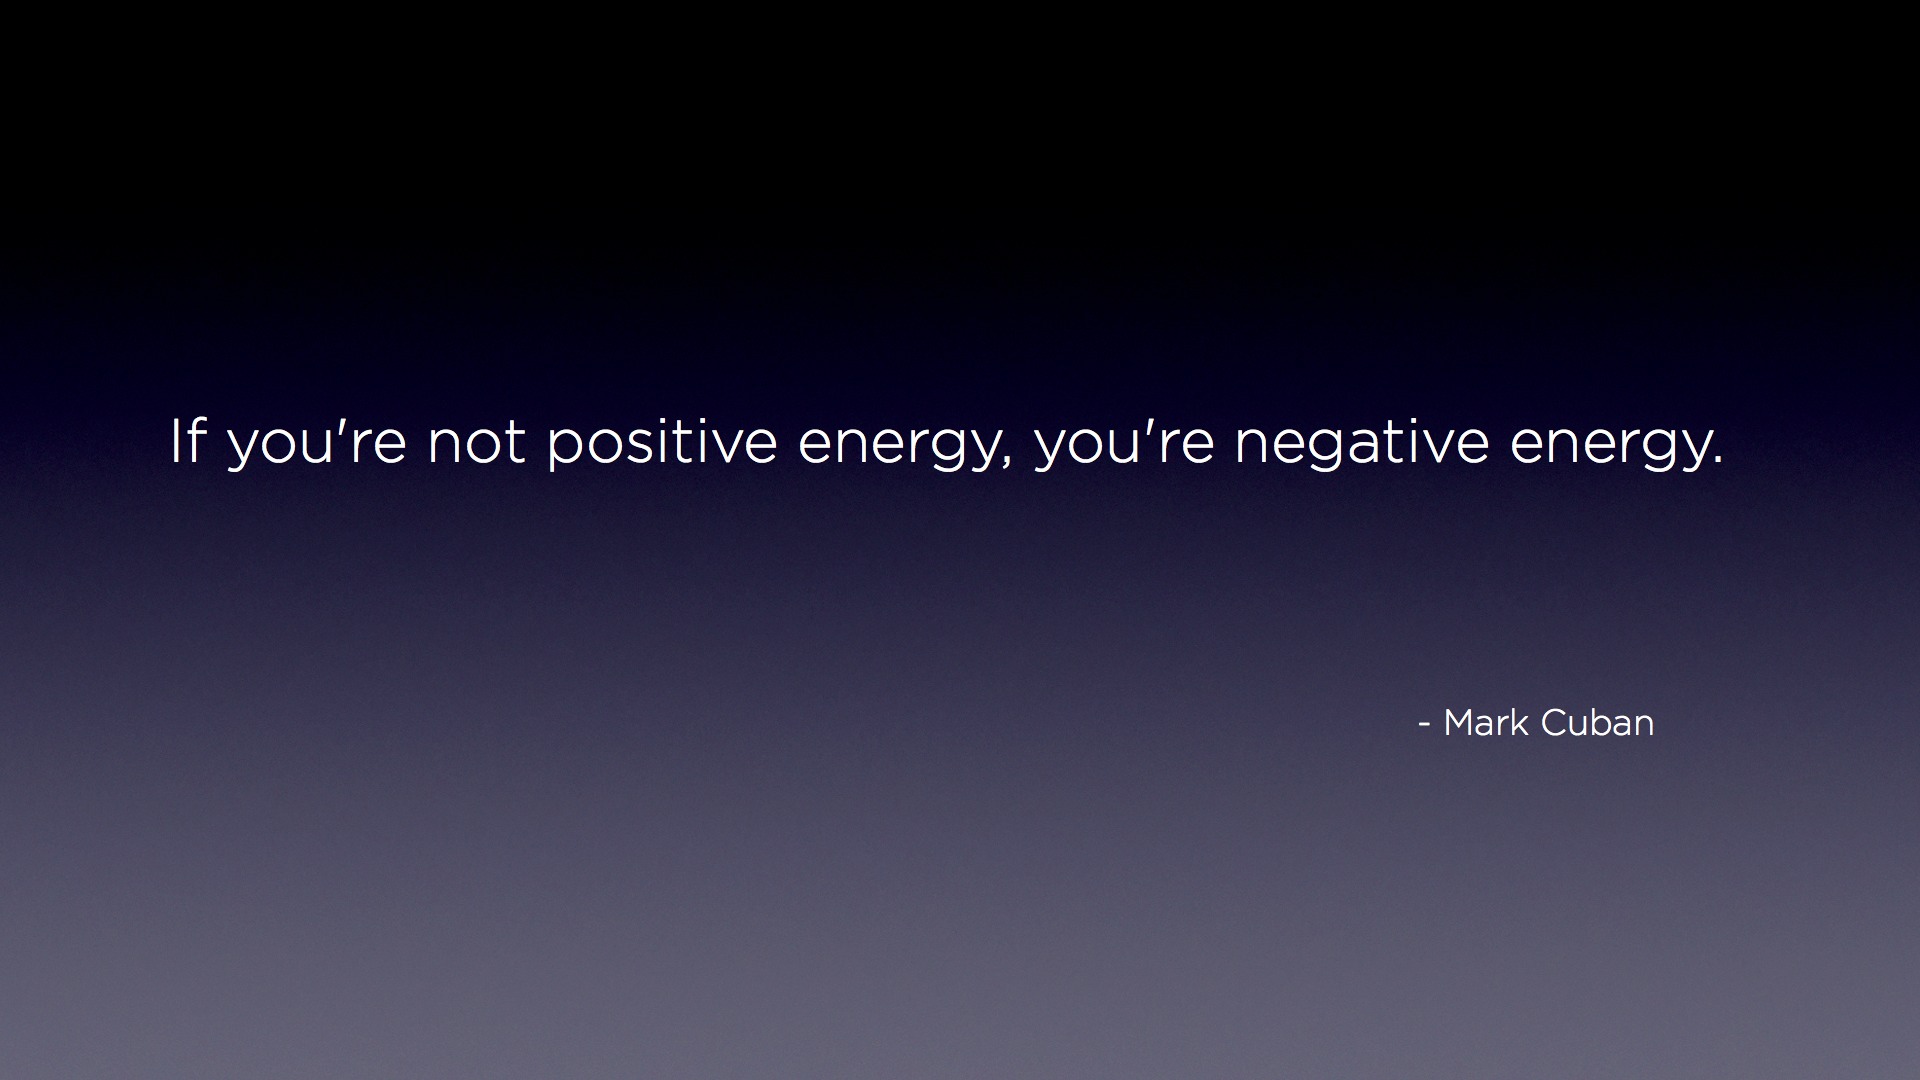 If you're not positive energy, you're negative energy. Mark Cuban